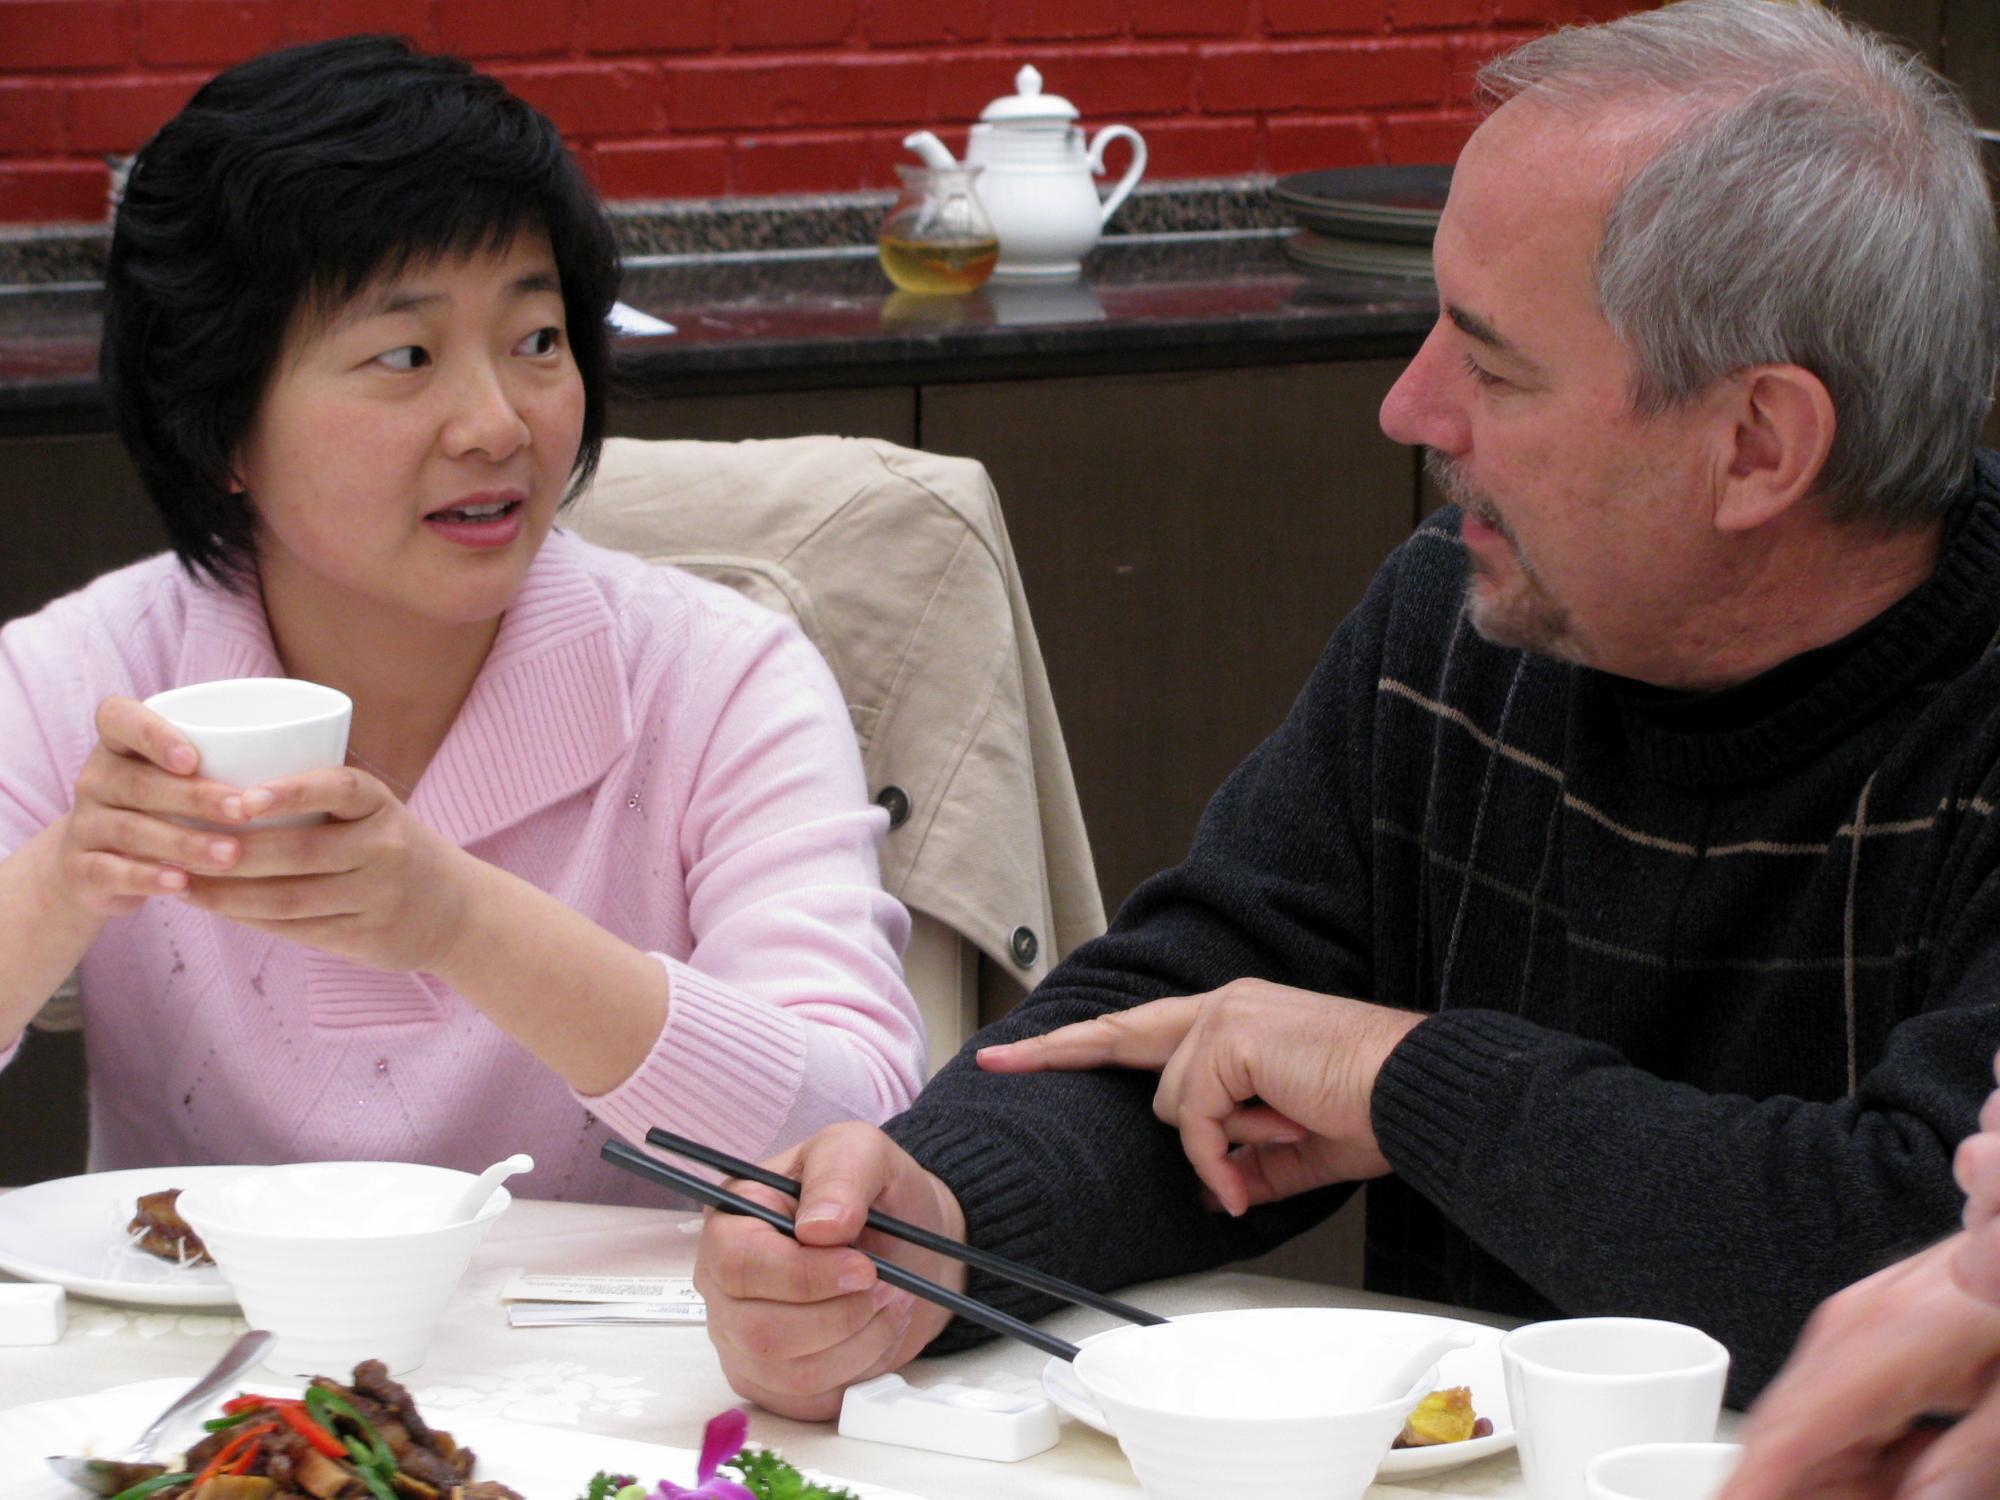 Myrrl Byler (right) converses with a government official (name withheld for security reasons) over a shared meal in Beijing, China in 2015.